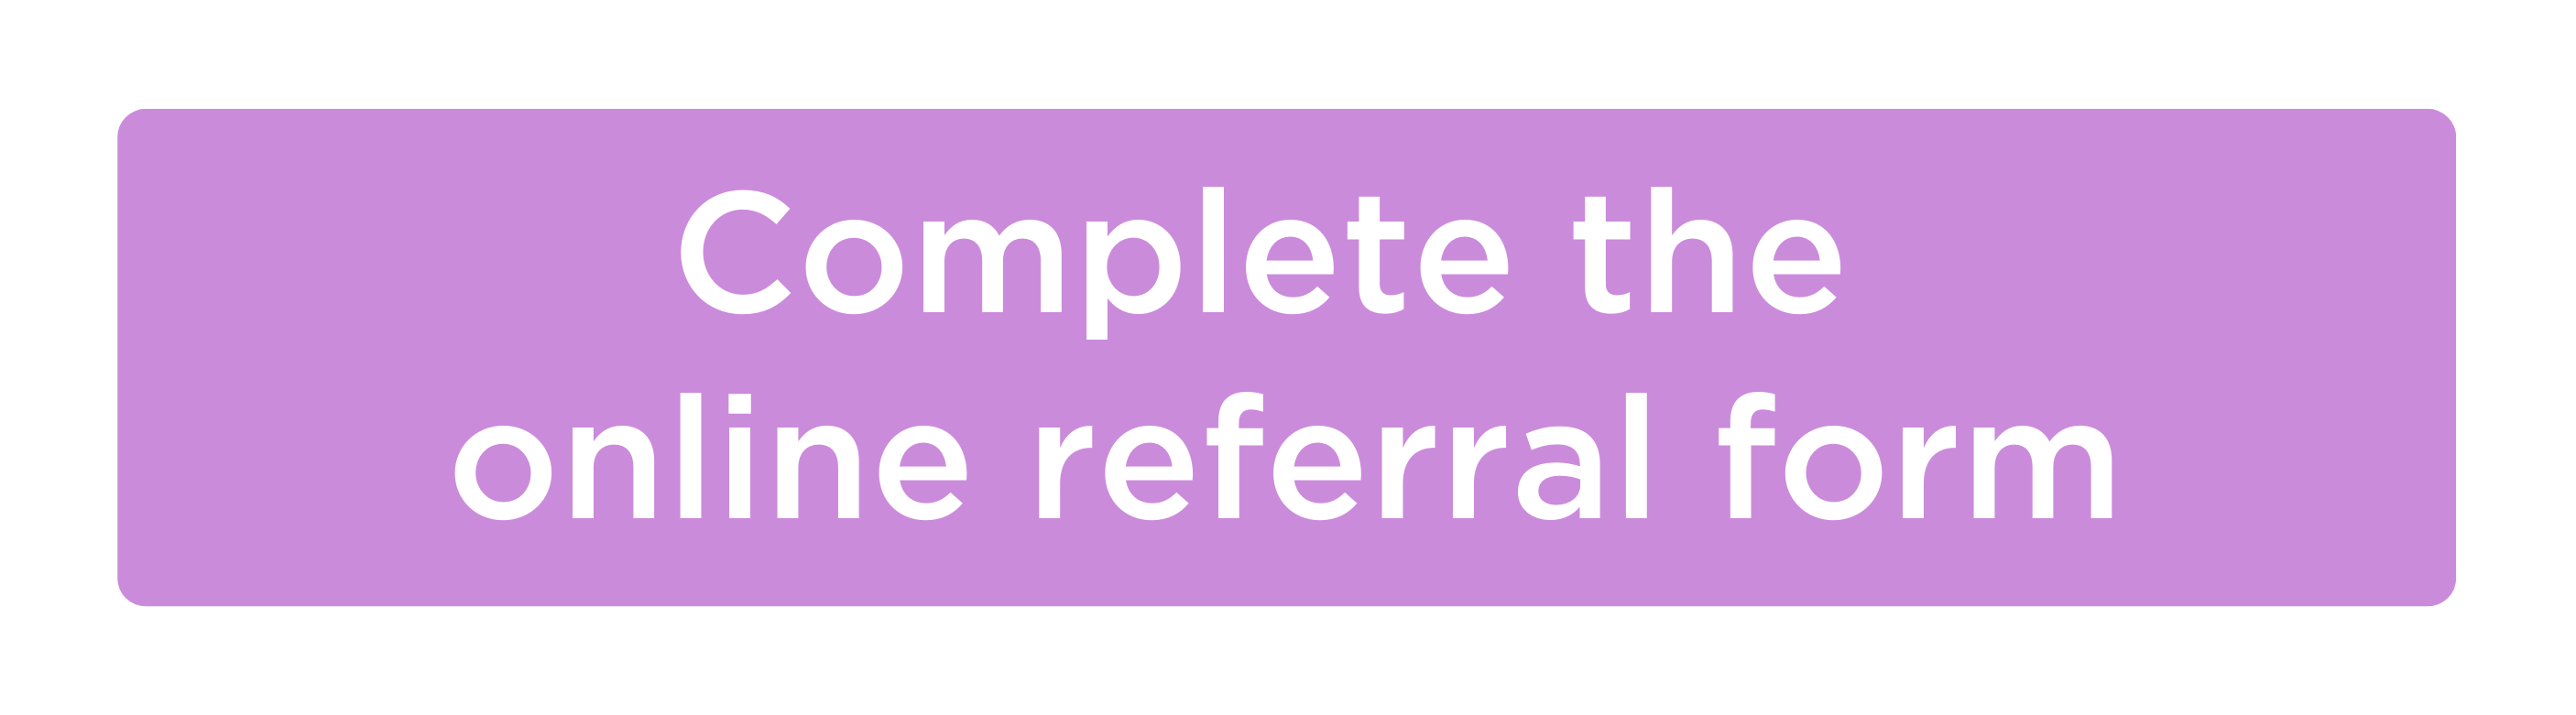 Complete the online referral form